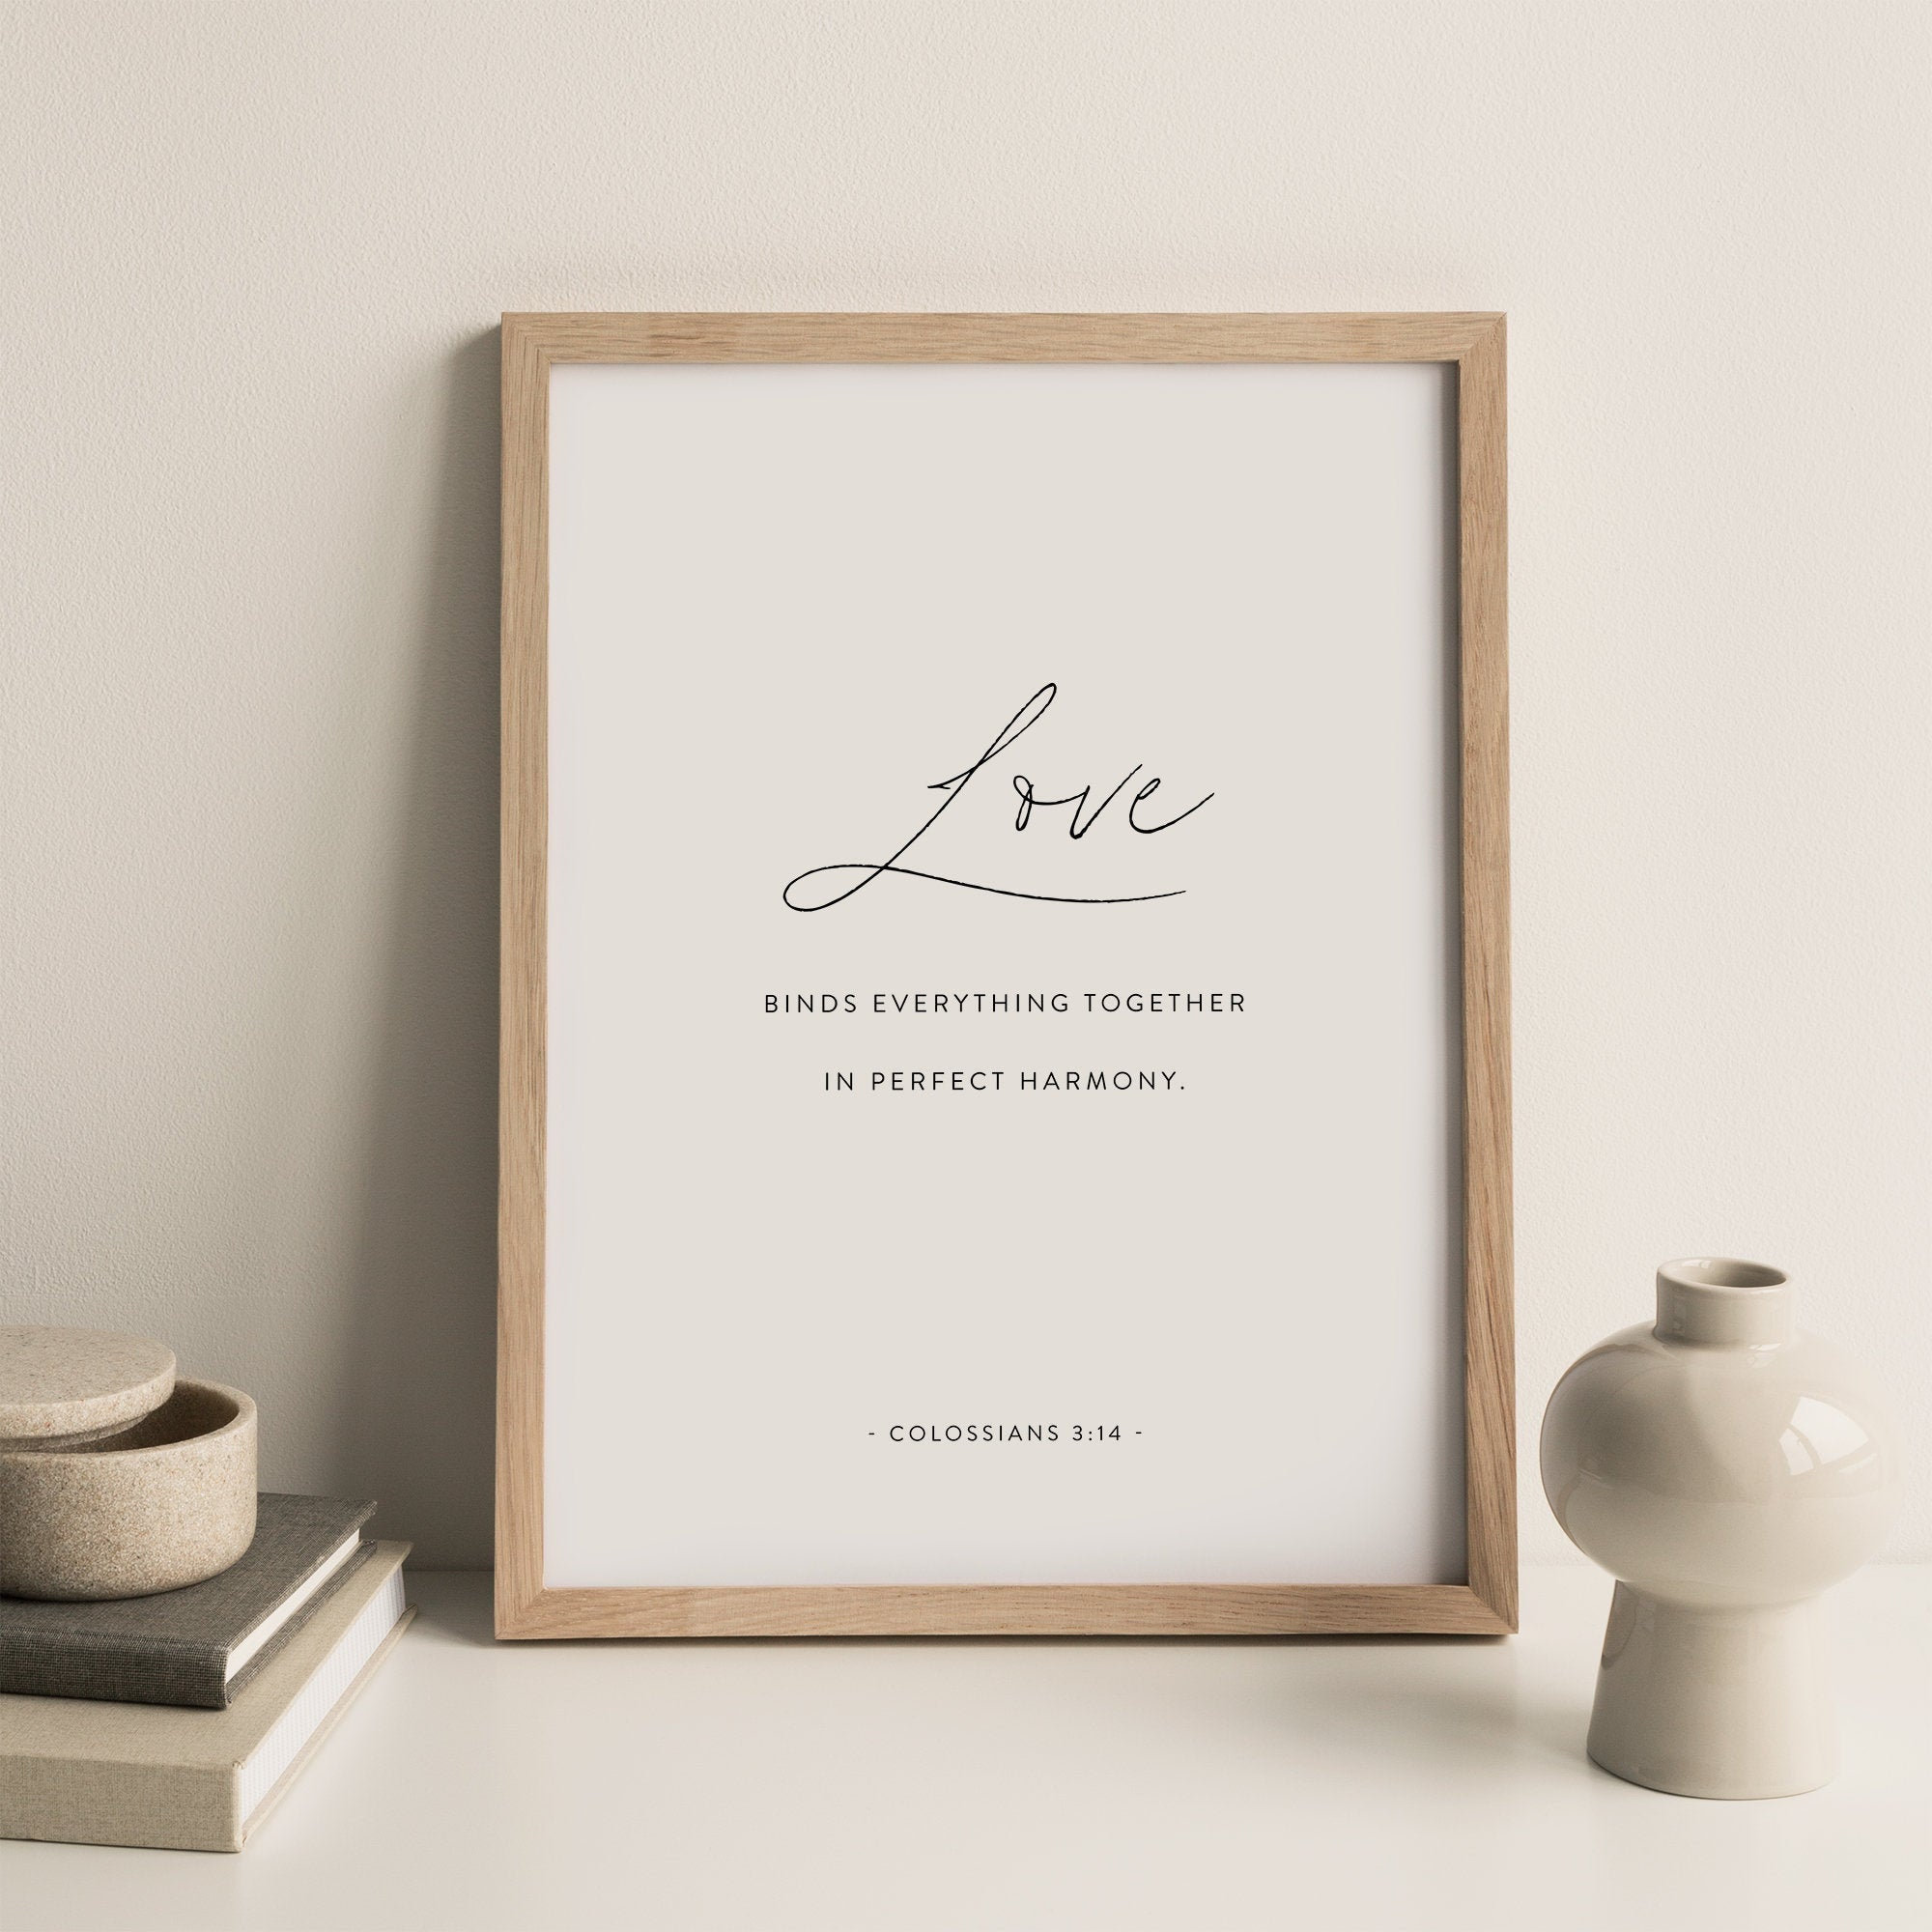 Wear Love Everywhere You Go. Bible Verse Print. Printable Bible Verse.  Colossians 3:14. Scripture Print. Bible Quotes Prints. Bedroom Decor.